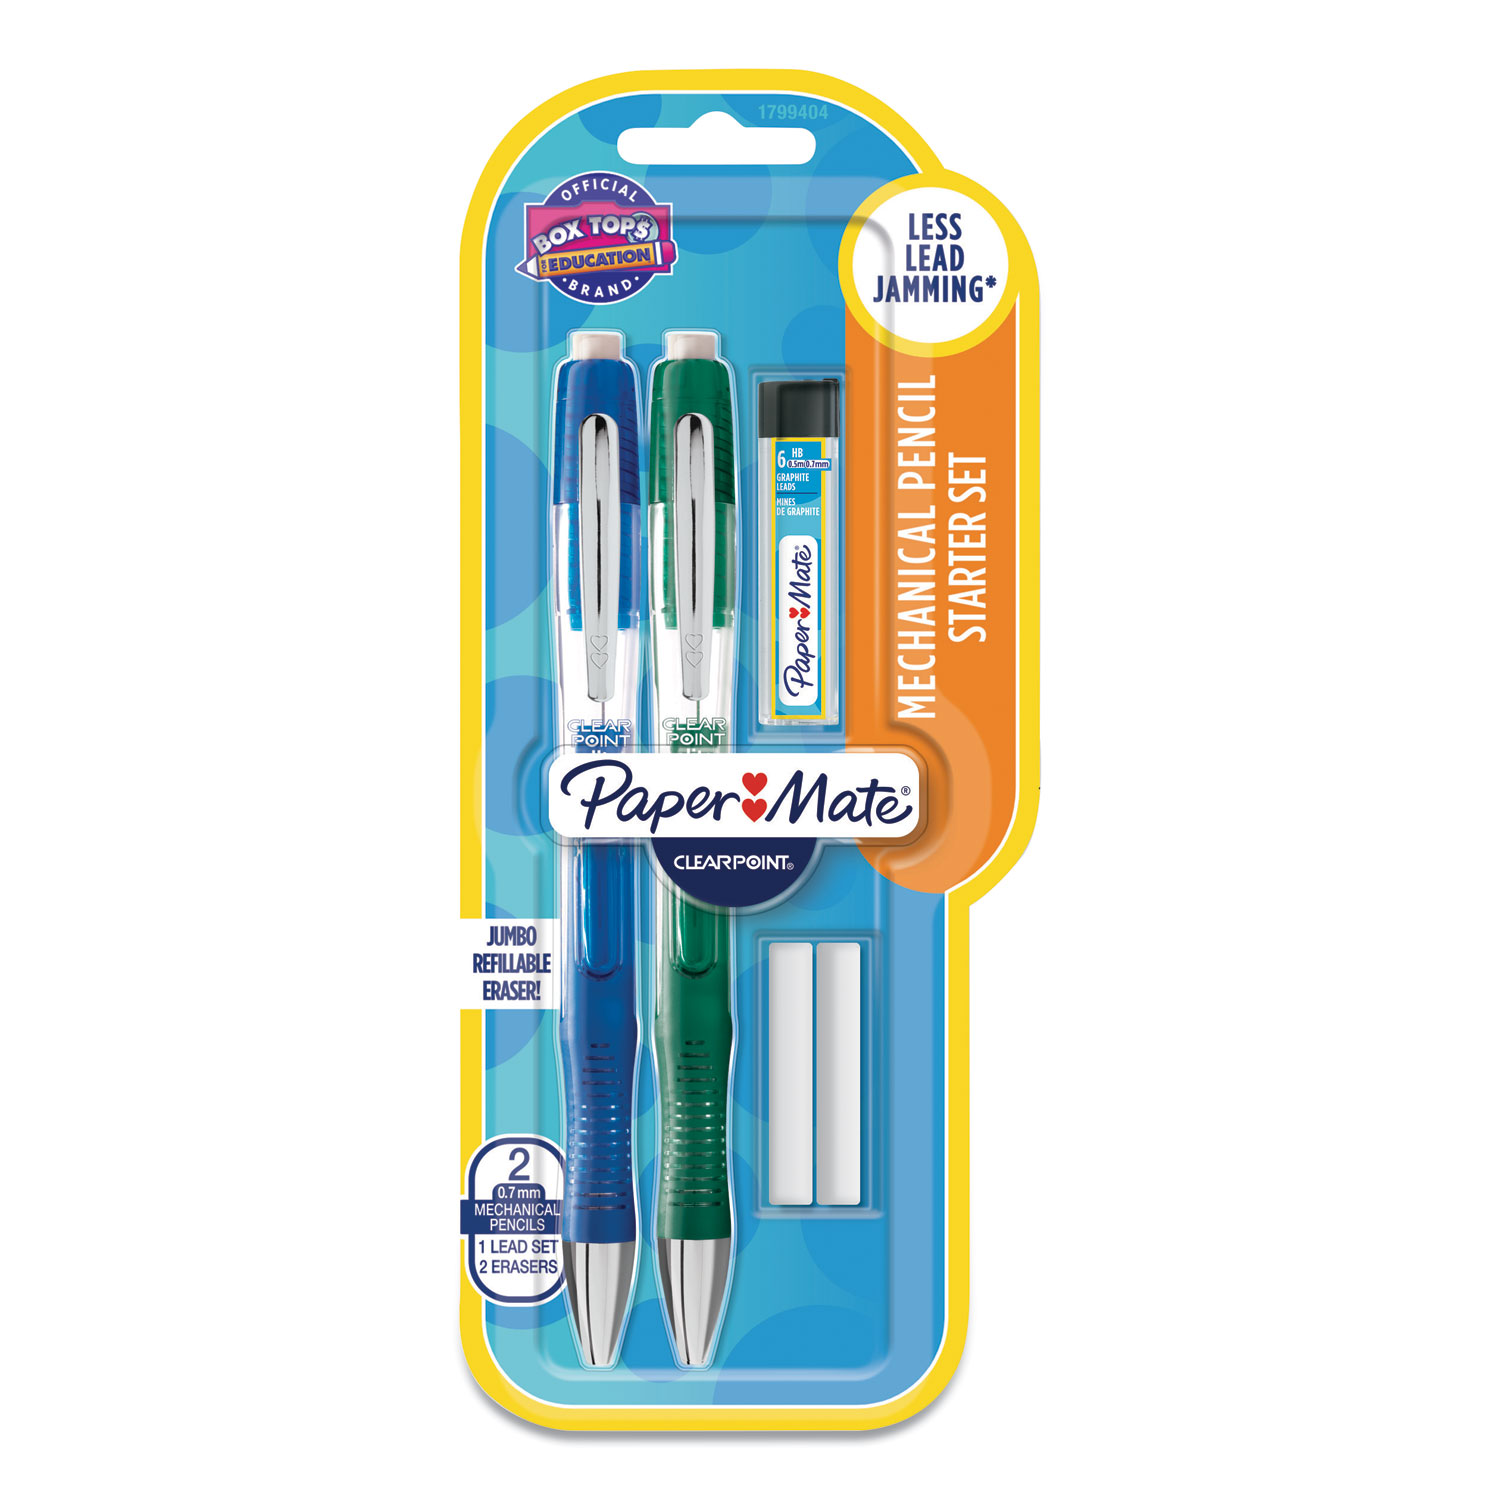  Paper Mate 1799404 Clearpoint Elite Mechanical Pencils, 0.7 mm, HB (#2), Black Lead, Blue and Green Barrels, 2/Pack (PAP1799404) 